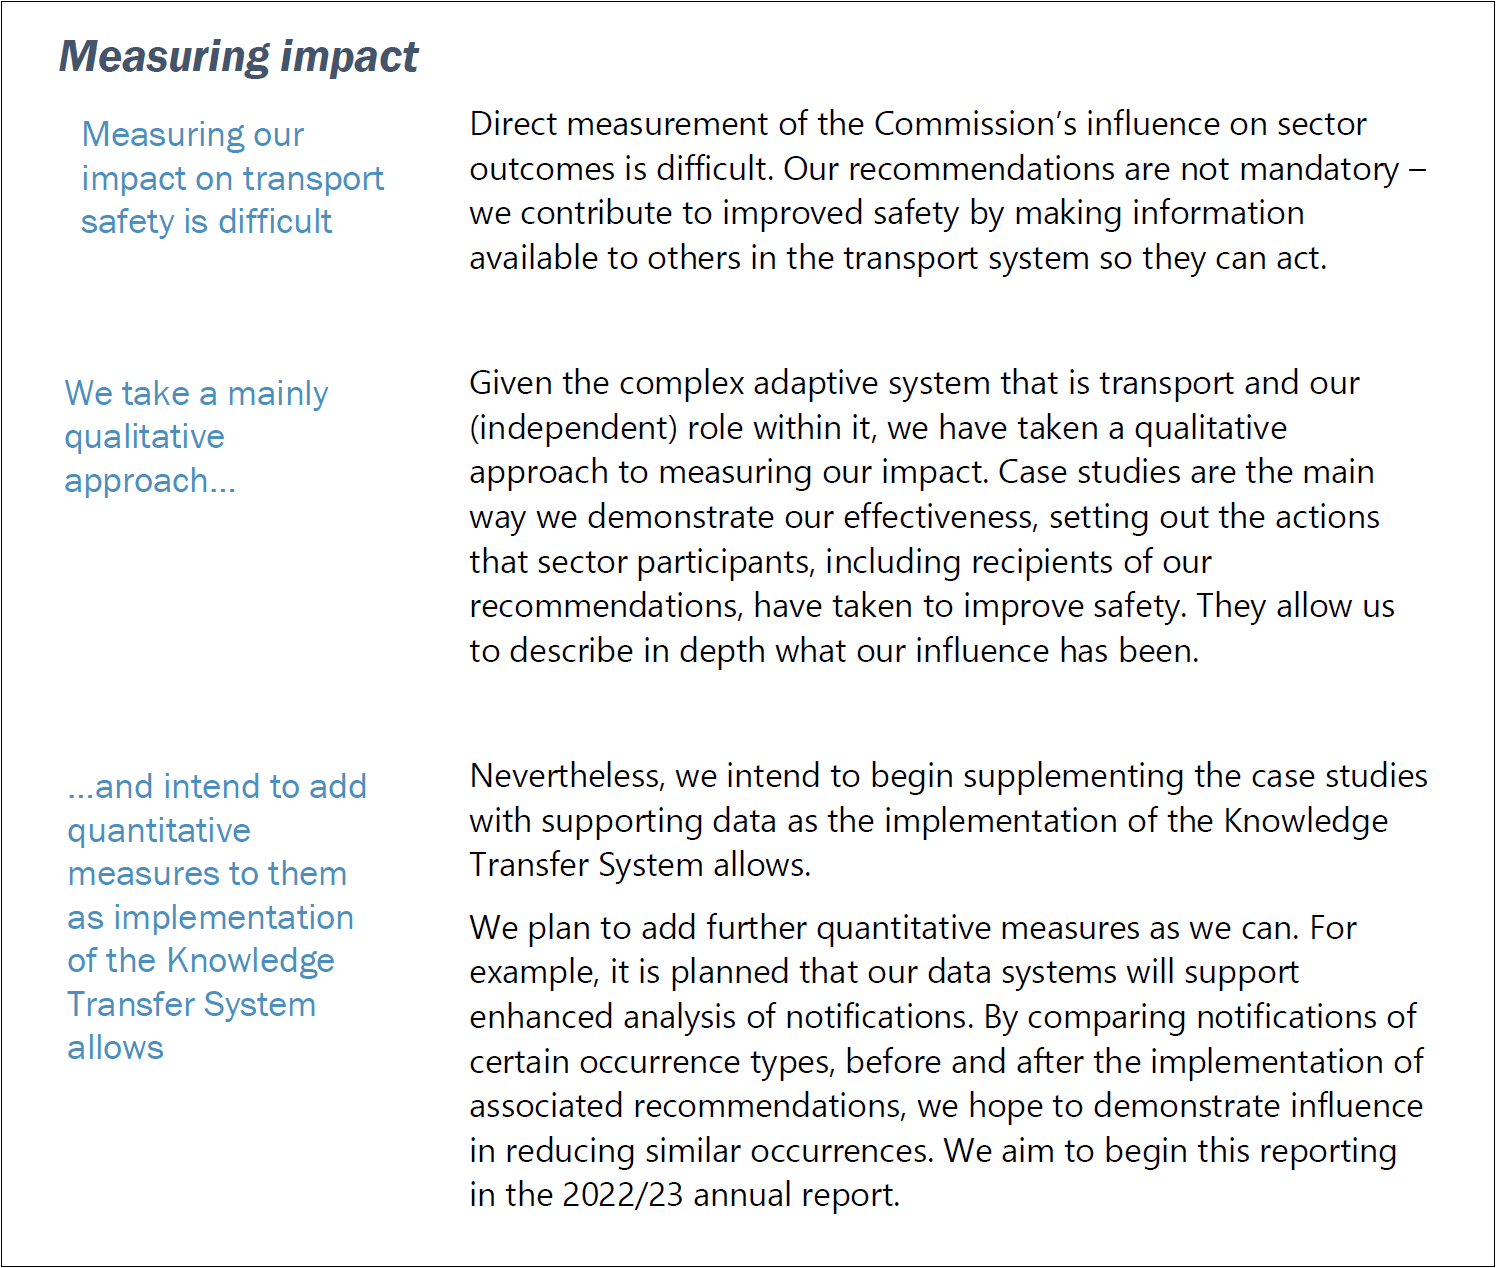 Image from the Transport Accident Investigation Commission 2021-2025 statement of intent that describes how it will improve its performance reporting framework and use of case studies by adding quantitative measures.